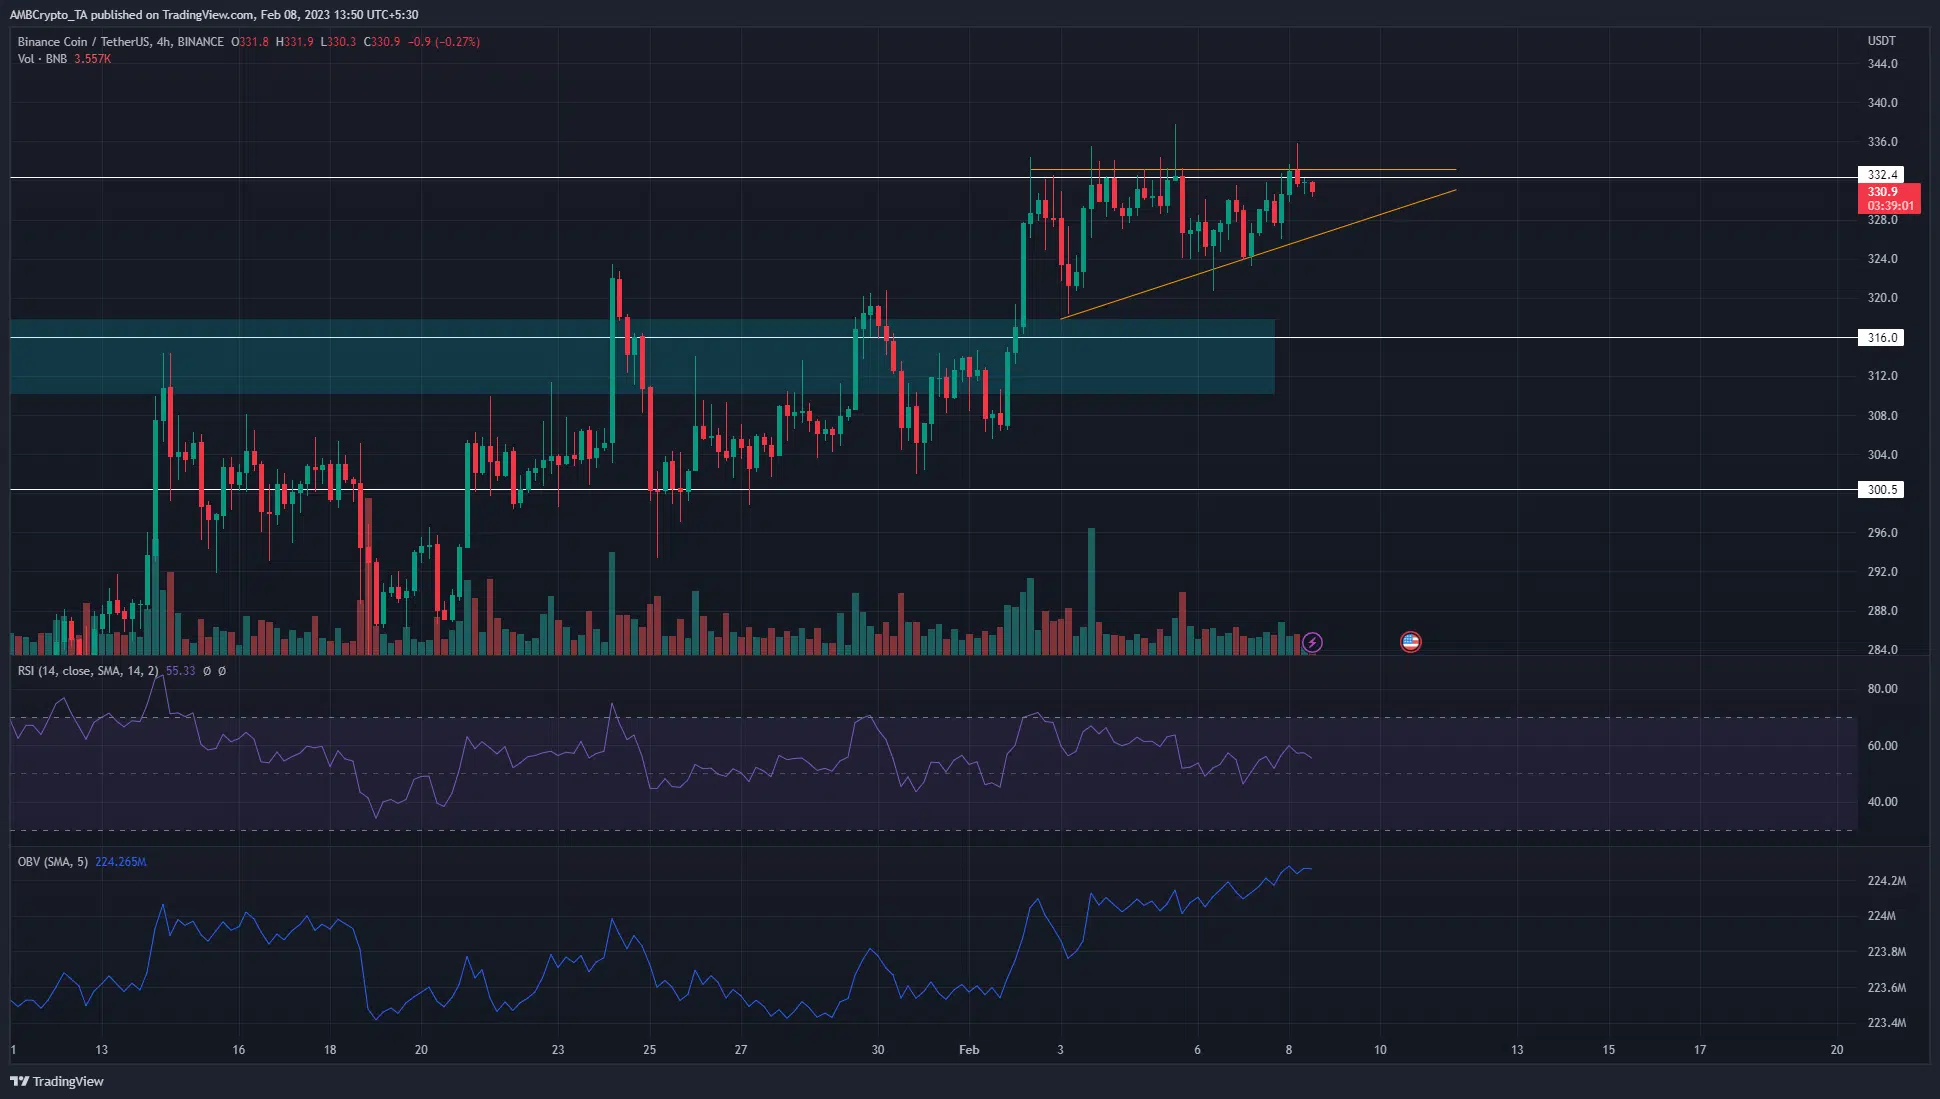 Binance Coin threatens to break out past $330, here's the next target